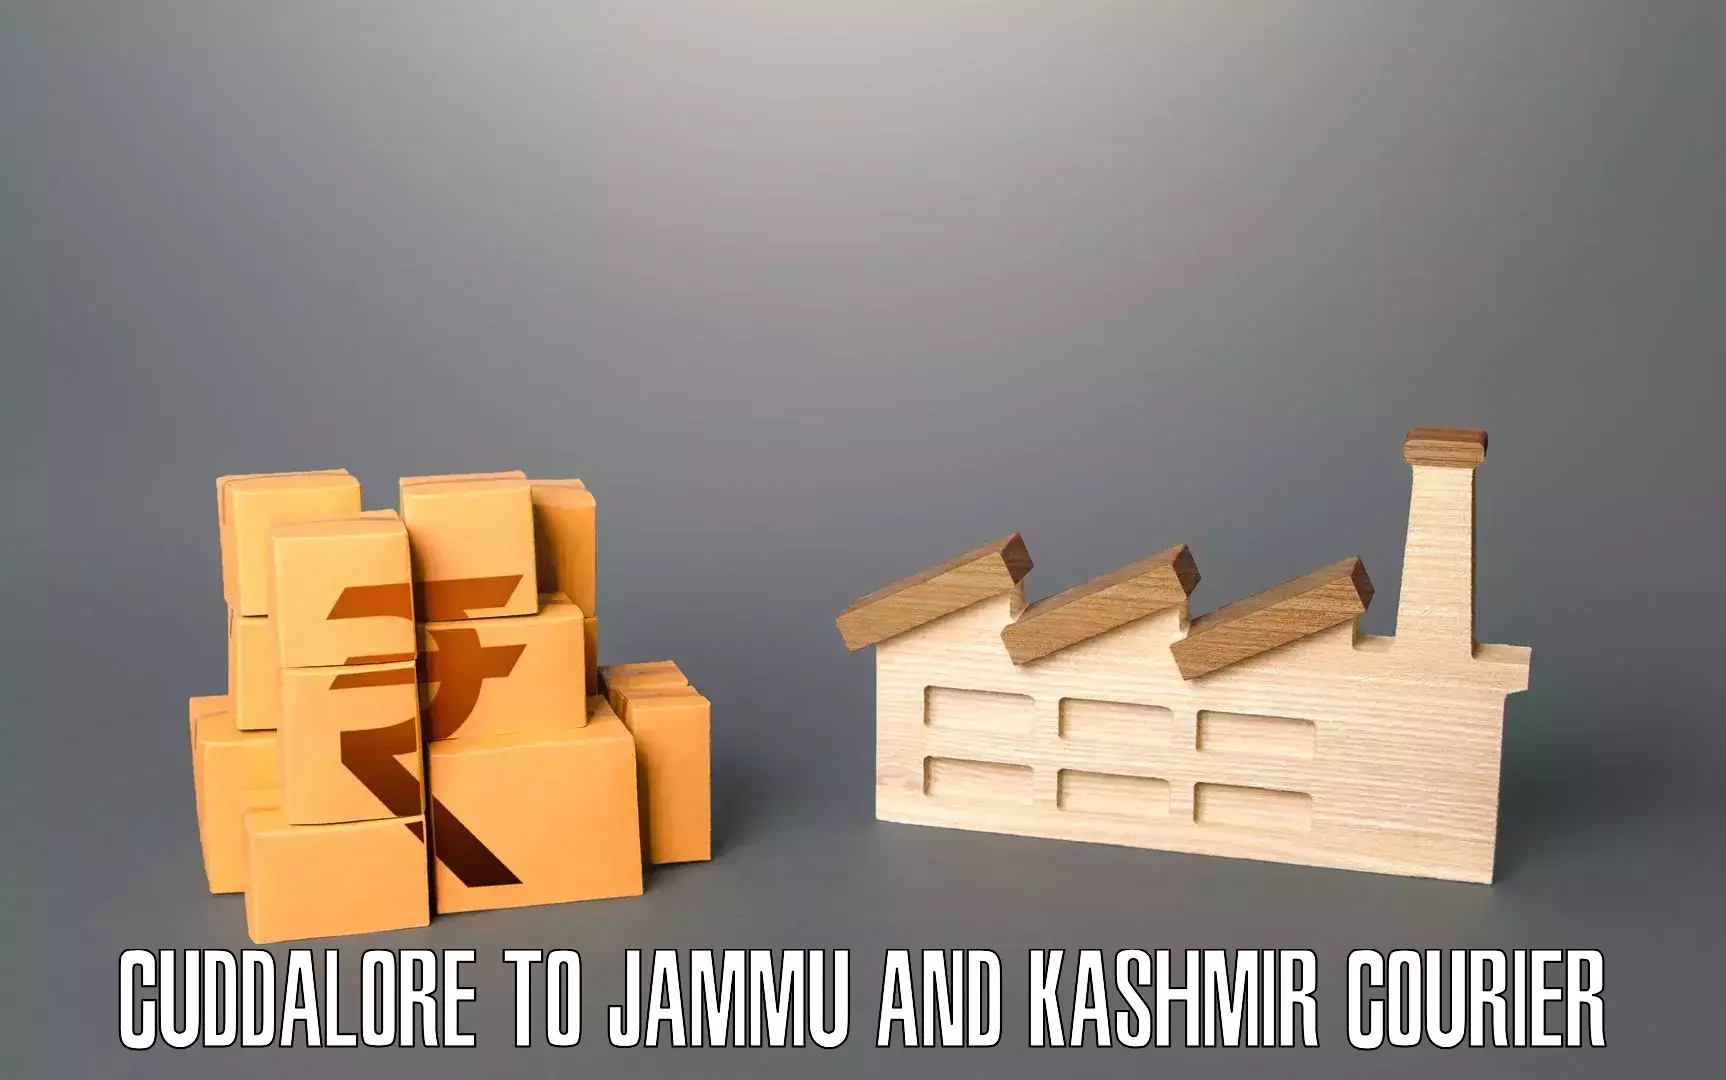 Full-service relocation in Cuddalore to Jammu and Kashmir